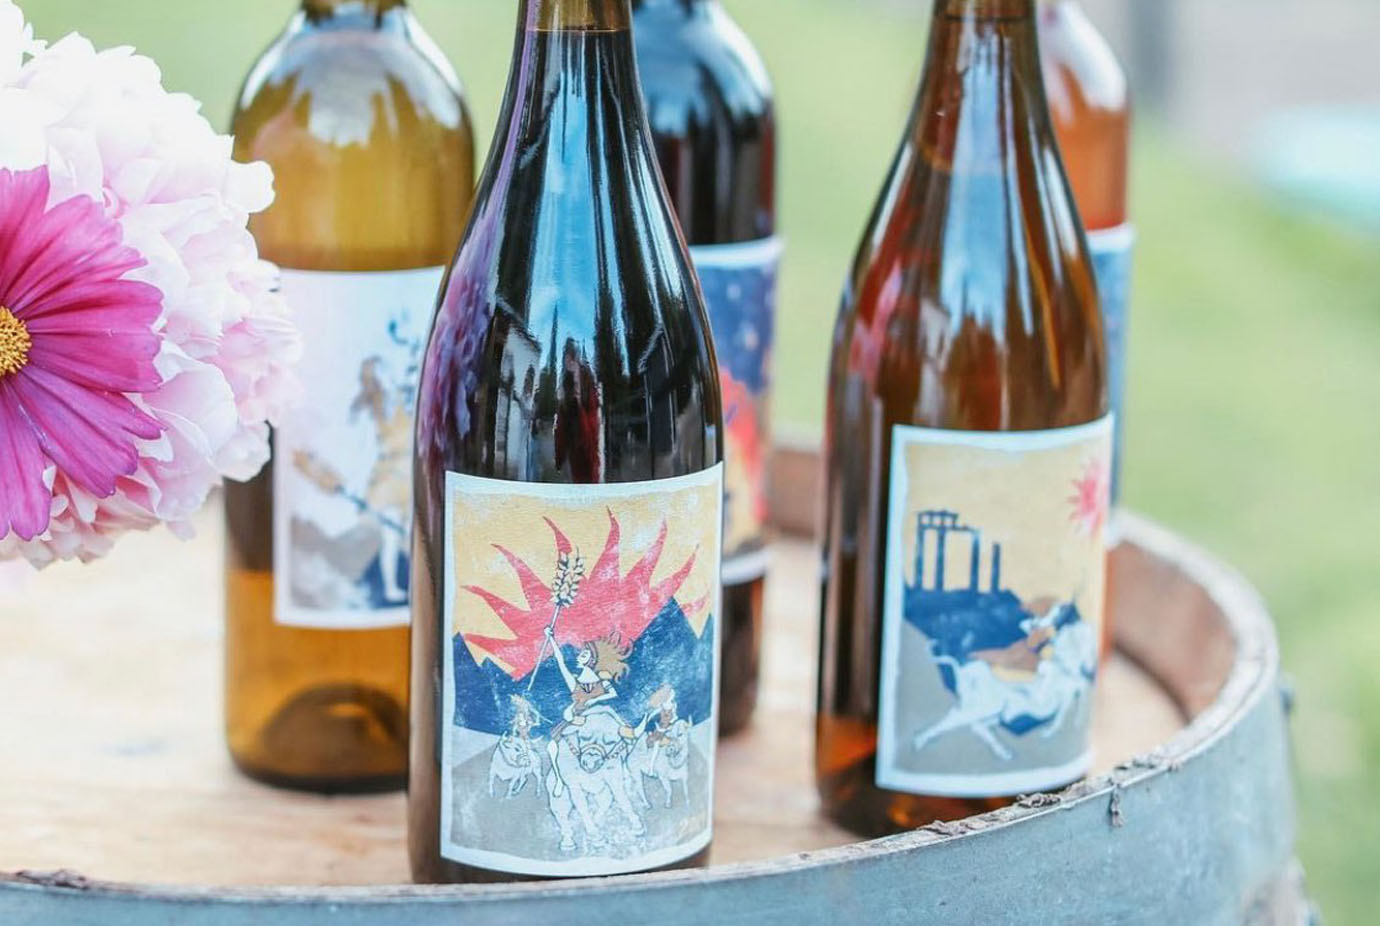 Florence Cellars wine bottle labels depict the story of a "day in the life" of an ancient woman warrior.